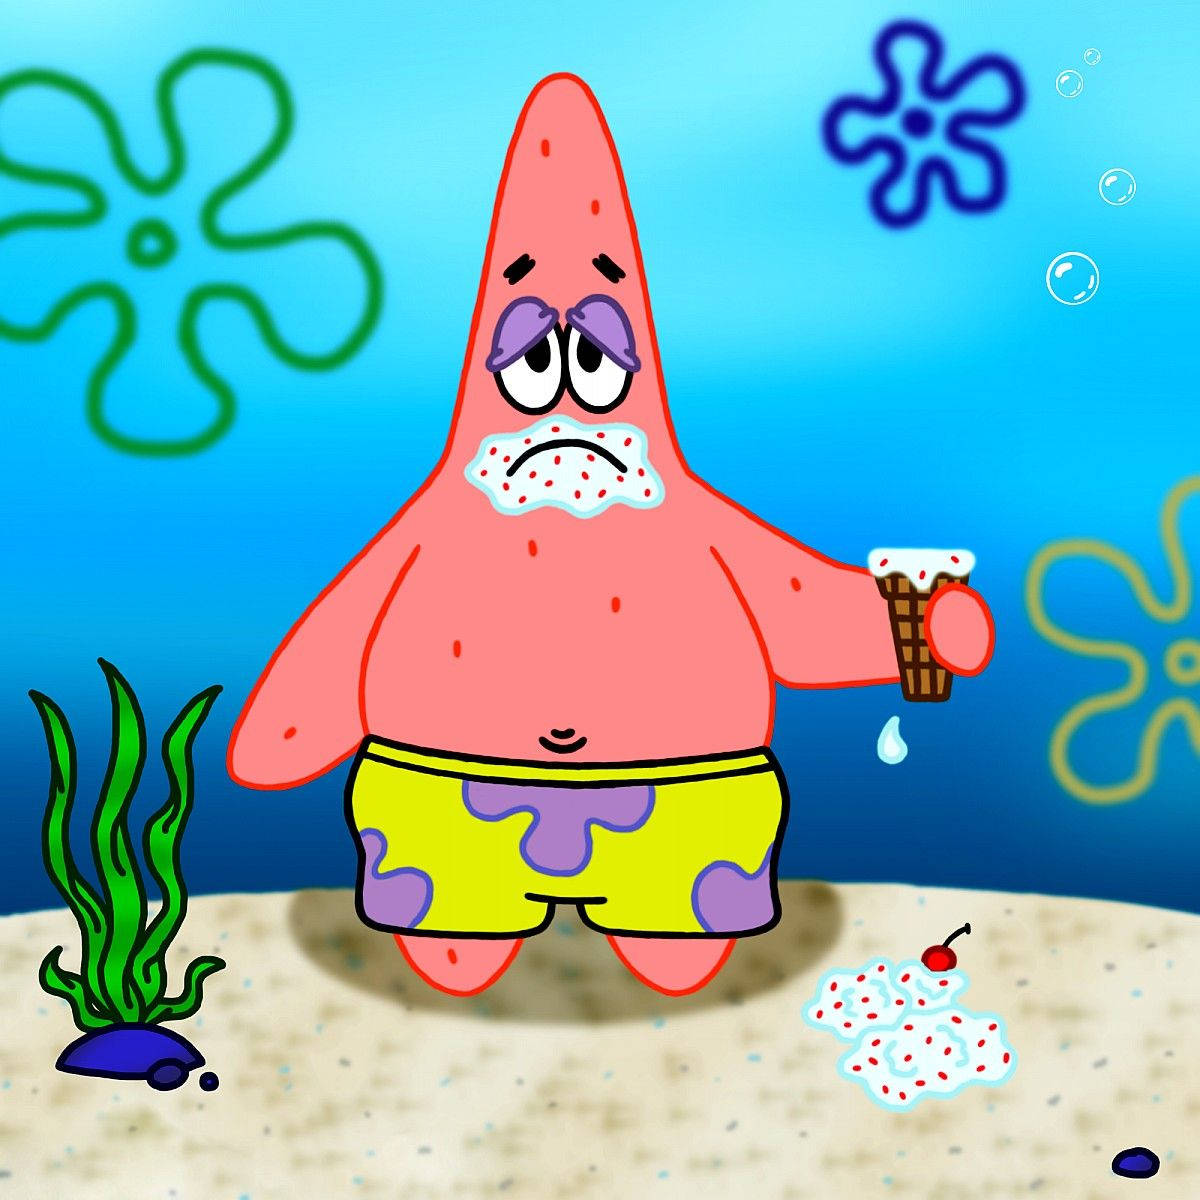 Clumsy Patrick Star With Ice Cream Background